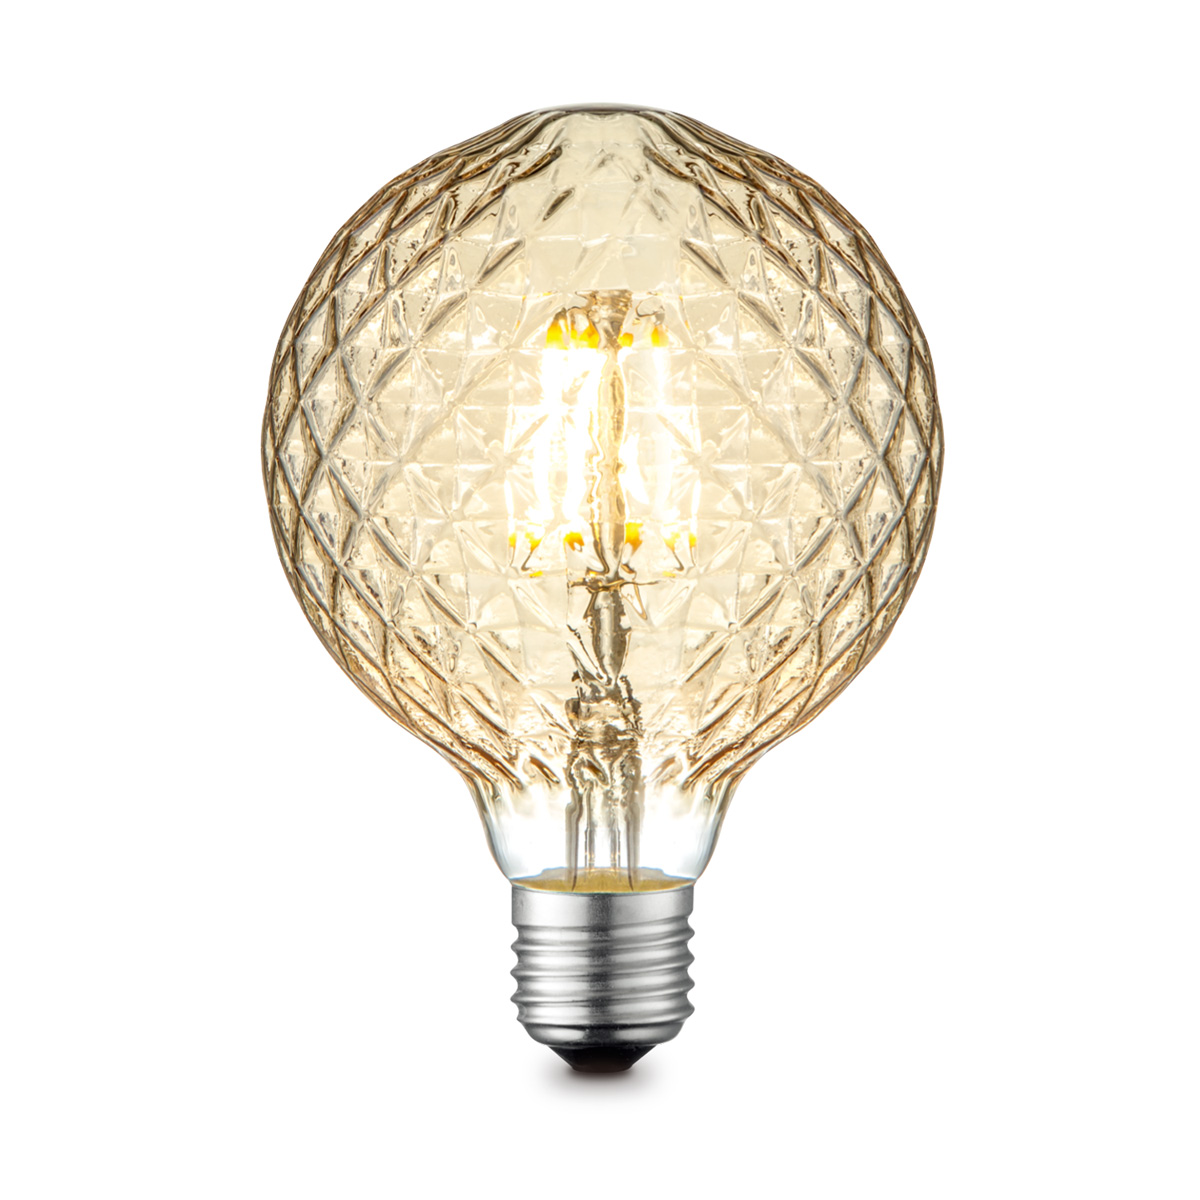 Tangla lighting - TLB-8071-04AM - LED Light Bulb Double Spiral Deco filament - G95 4W amber - dimmable - pineapple - E27